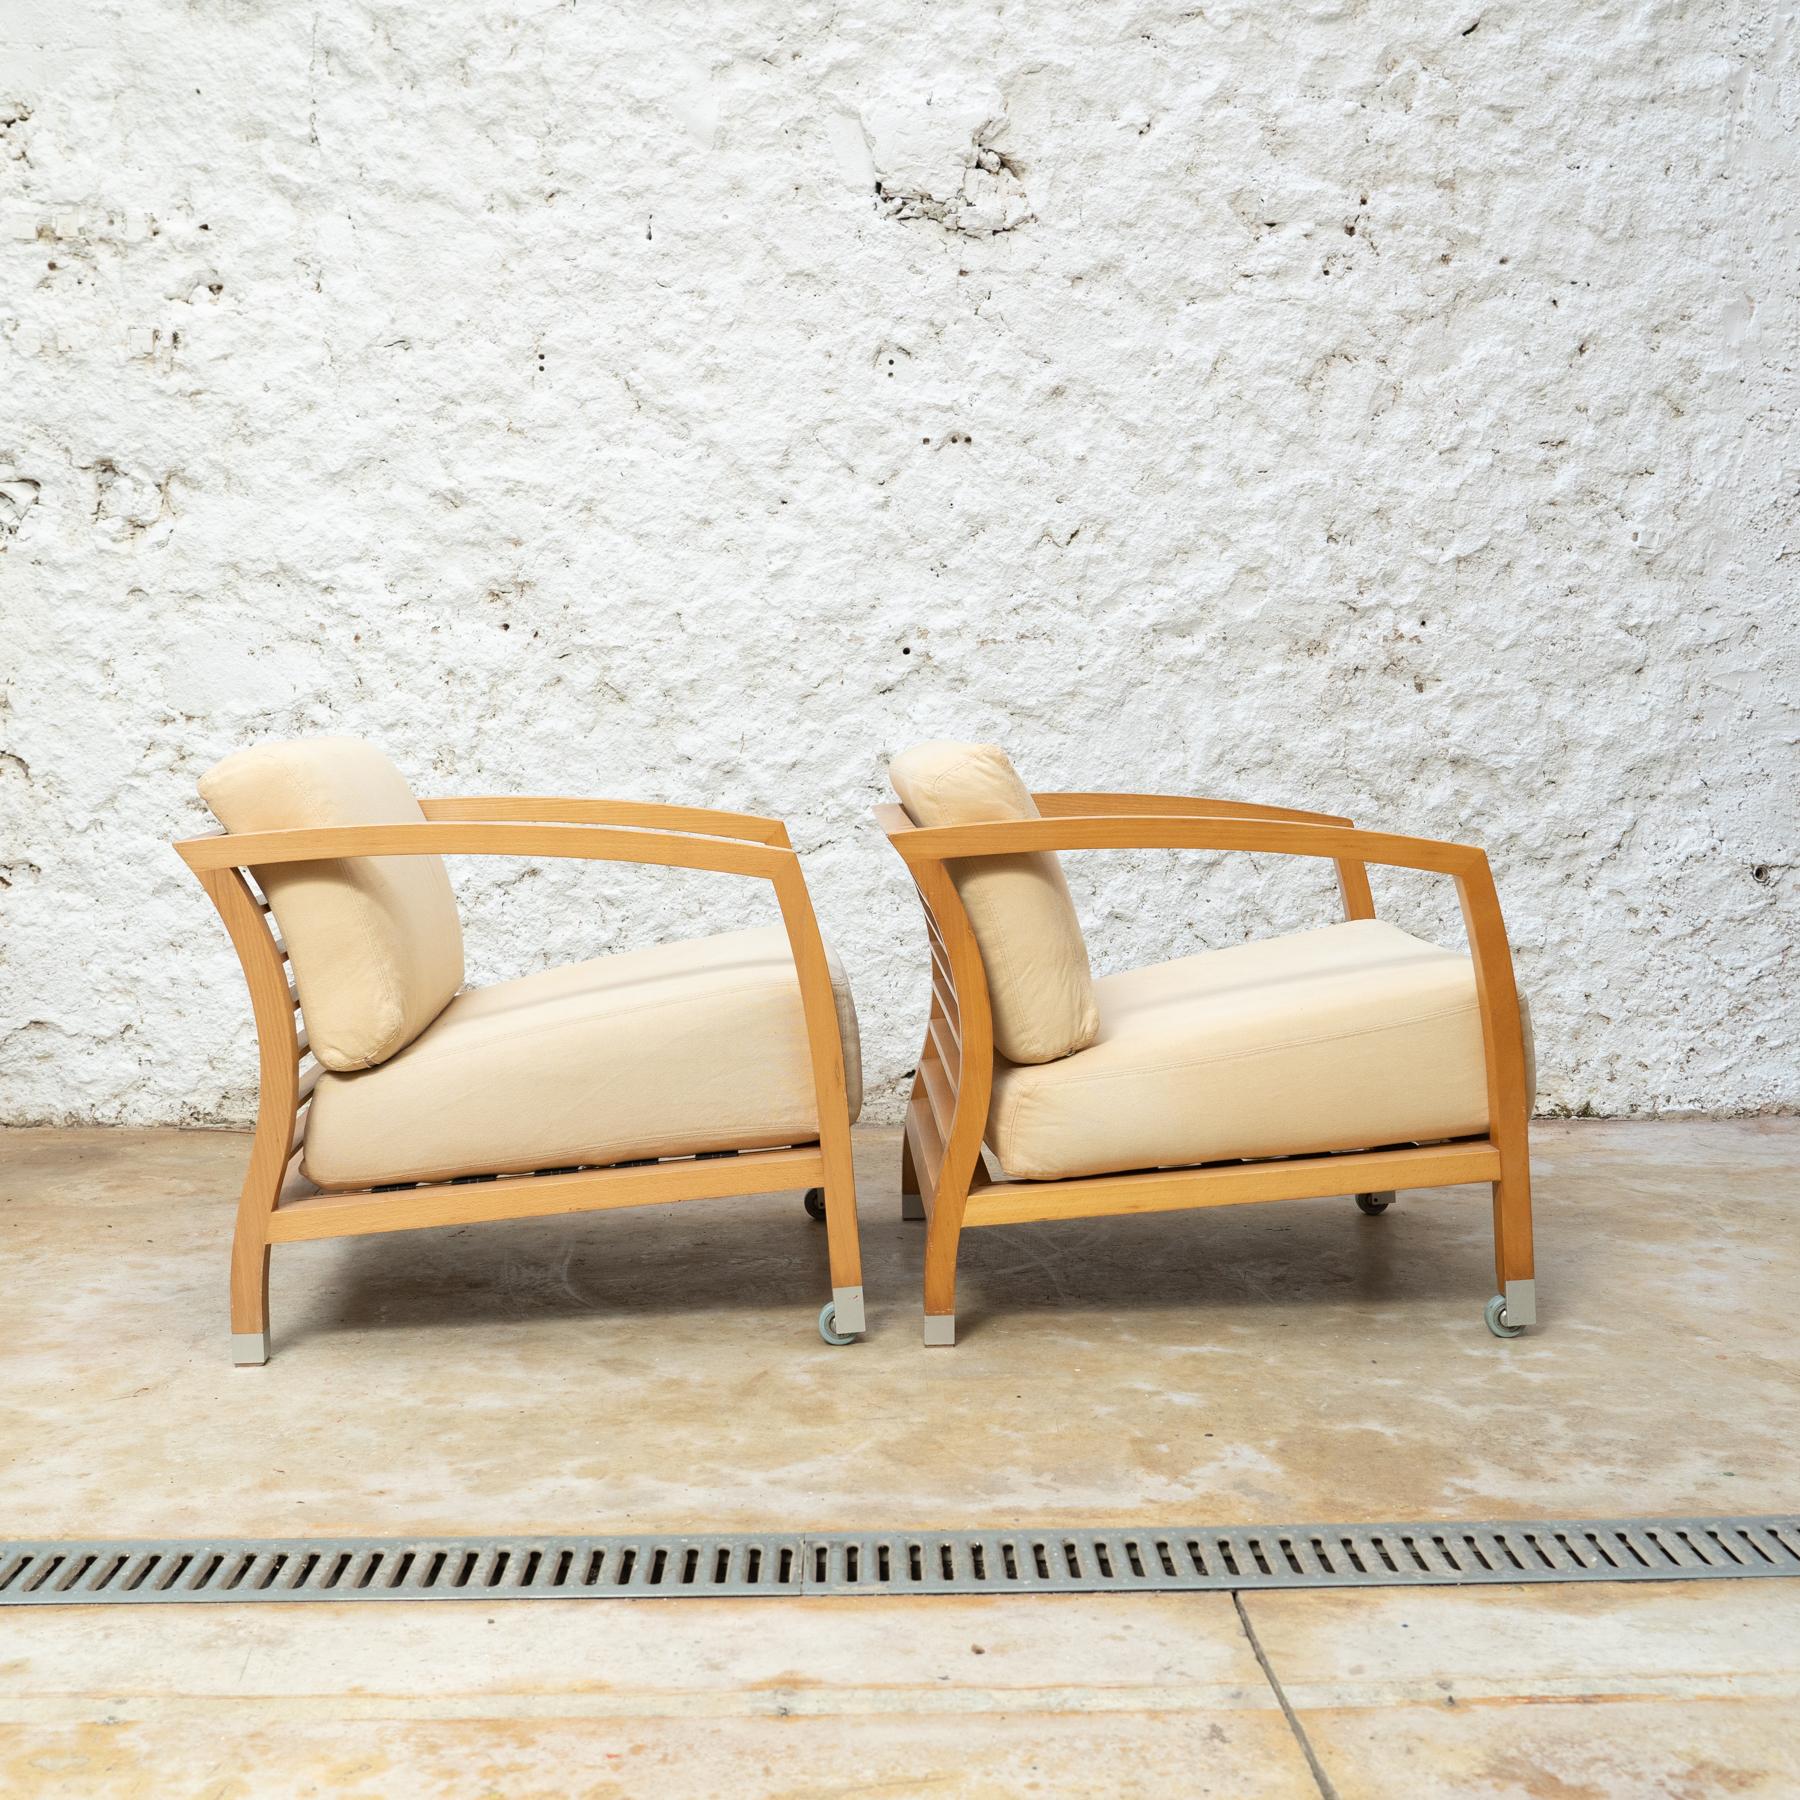 Stua Malena Pair of Armchairs: Contemporary Spanish Design In Good Condition For Sale In Barcelona, Barcelona